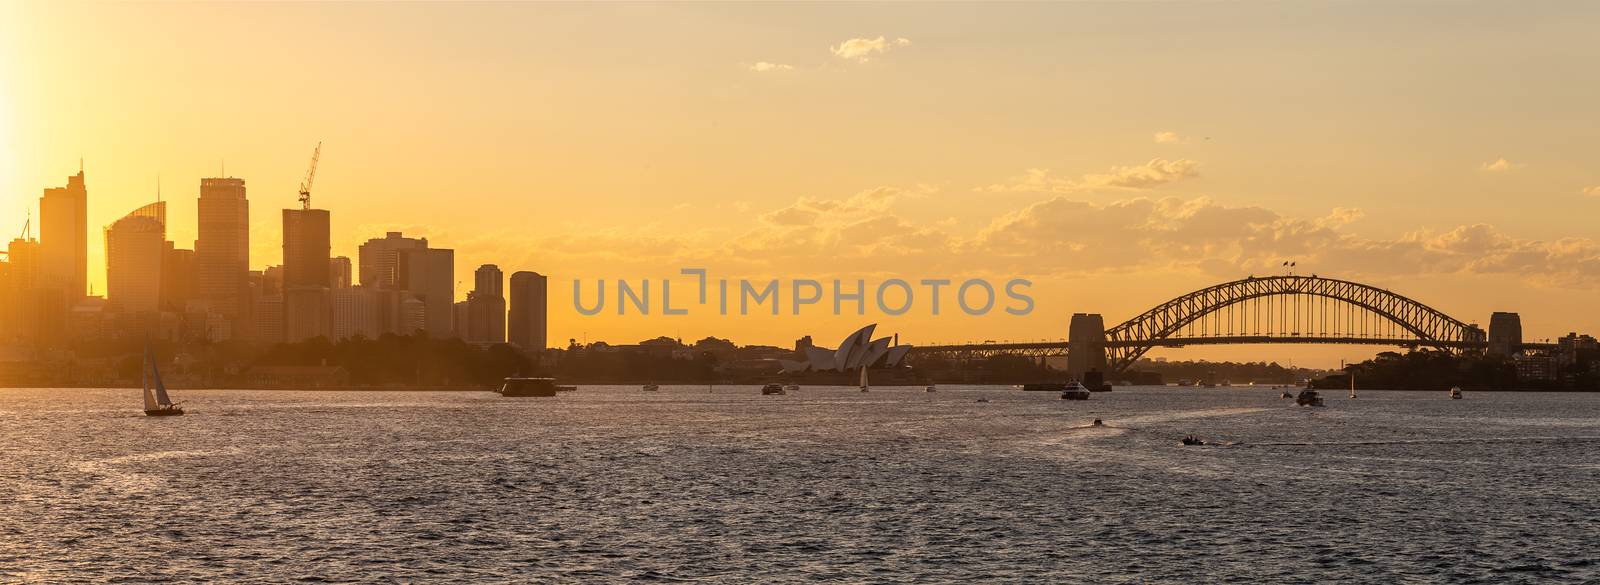 Panorama view of Sydney harbor at sunset by DamantisZ